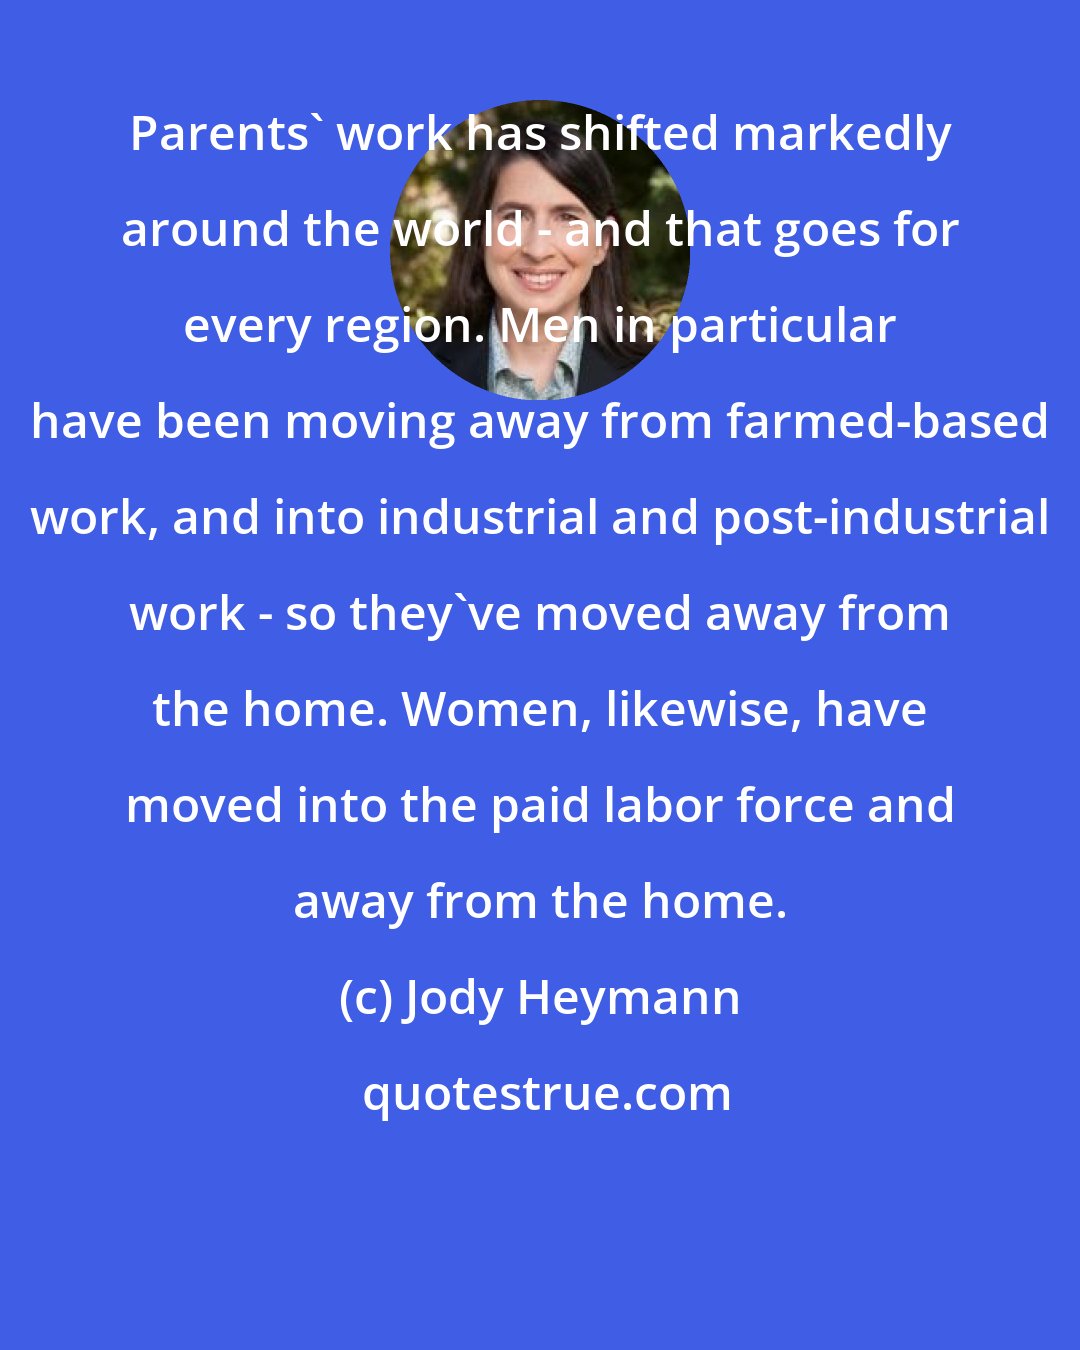 Jody Heymann: Parents' work has shifted markedly around the world - and that goes for every region. Men in particular have been moving away from farmed-based work, and into industrial and post-industrial work - so they've moved away from the home. Women, likewise, have moved into the paid labor force and away from the home.